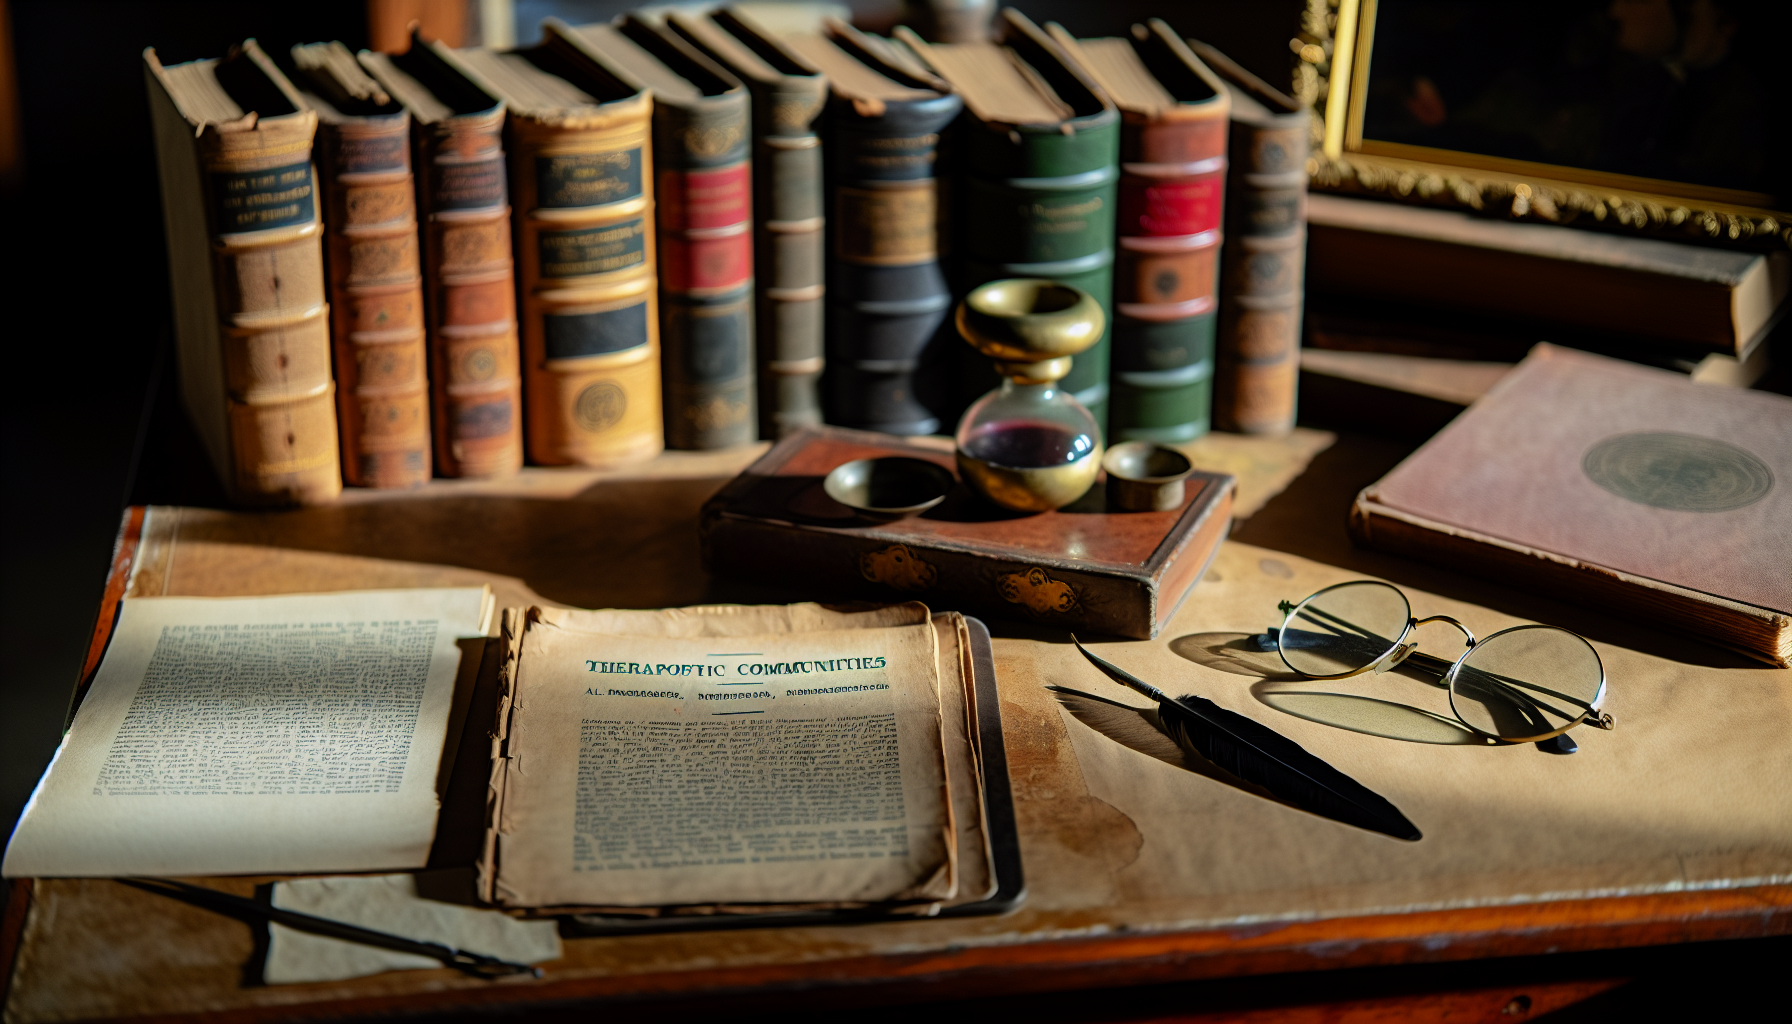 Photo of historical documents and books, representing the origins and evolution of therapeutic communities